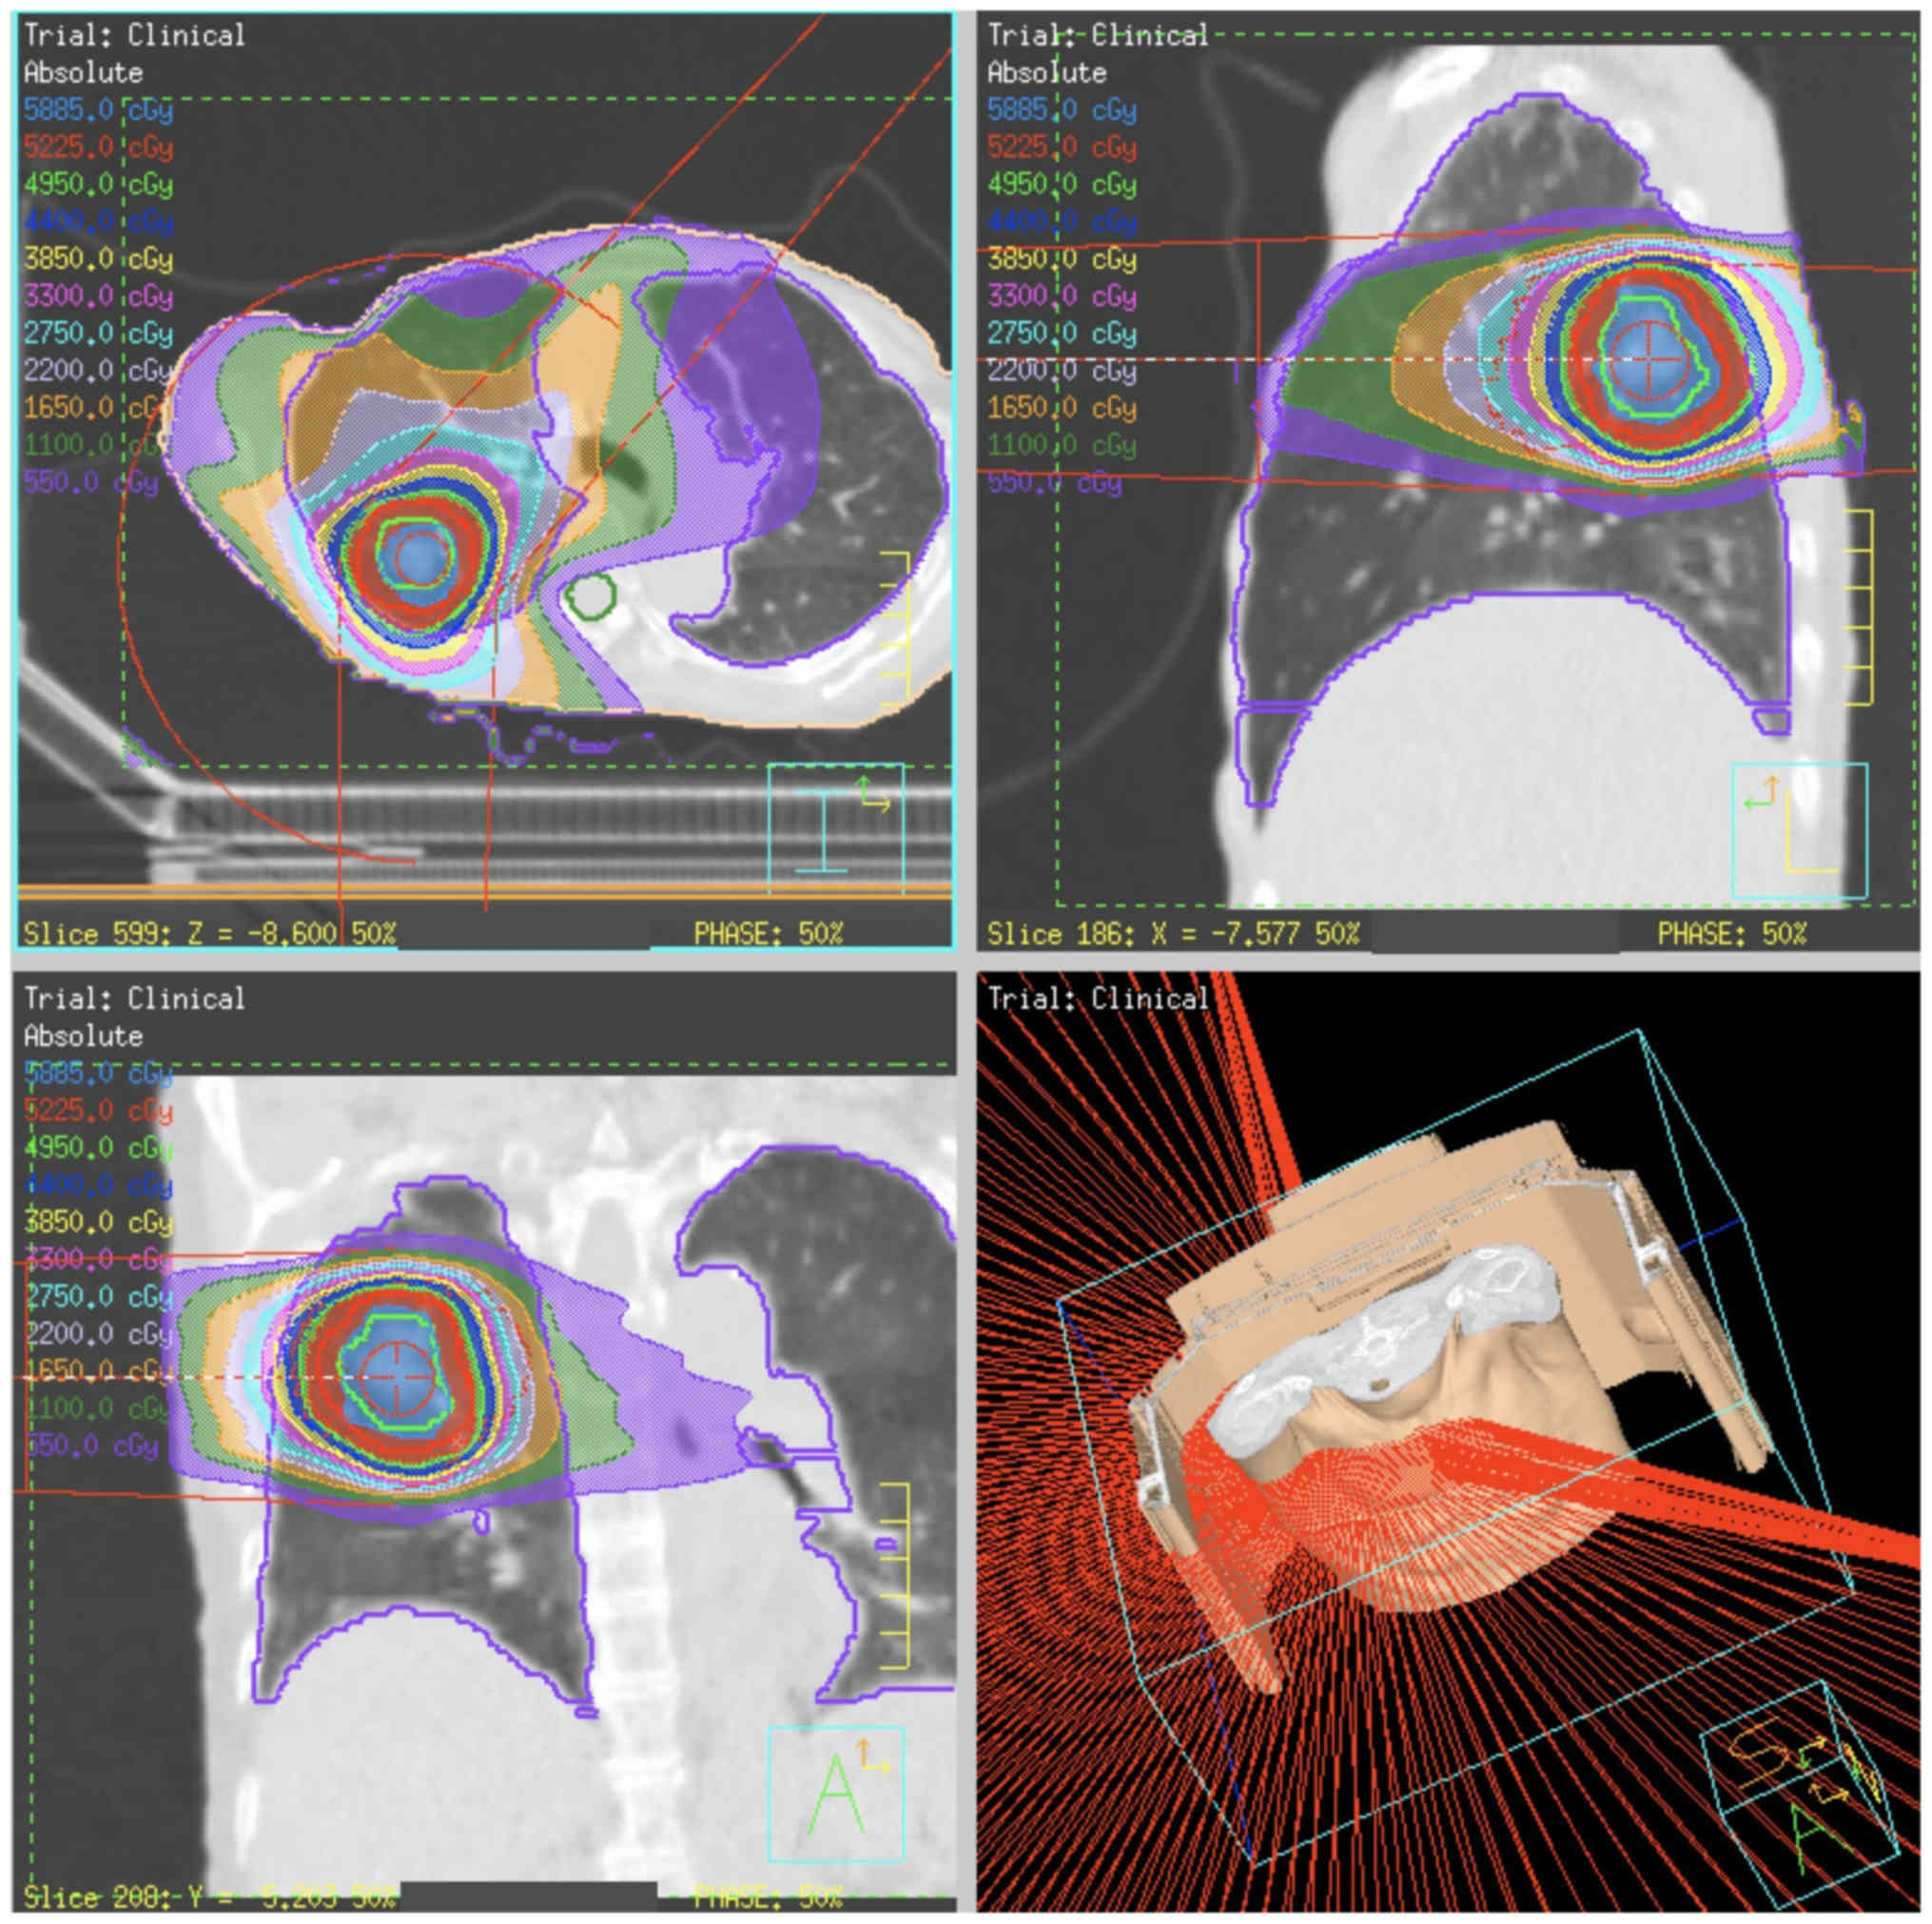 Sbrt Sexy - Flattening filter-free technique in volumetric modulated arc therapy for  lung stereotactic body radiotherapy: A clinical comparison with the  flattening filter technique